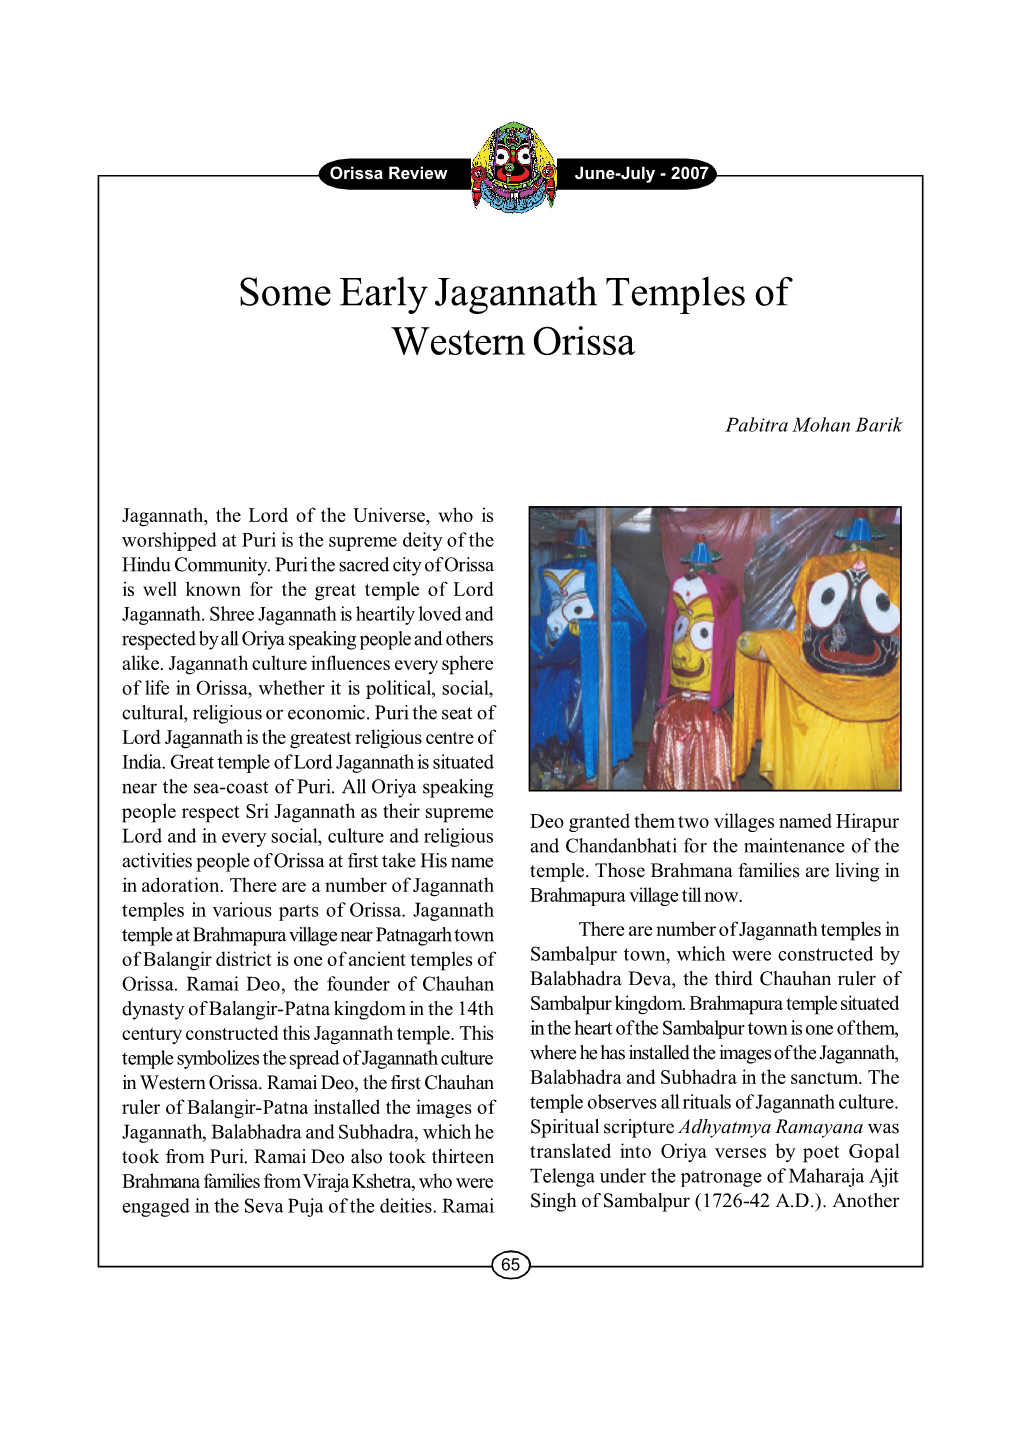 Some Early Jagannath Temples of Western Orissa